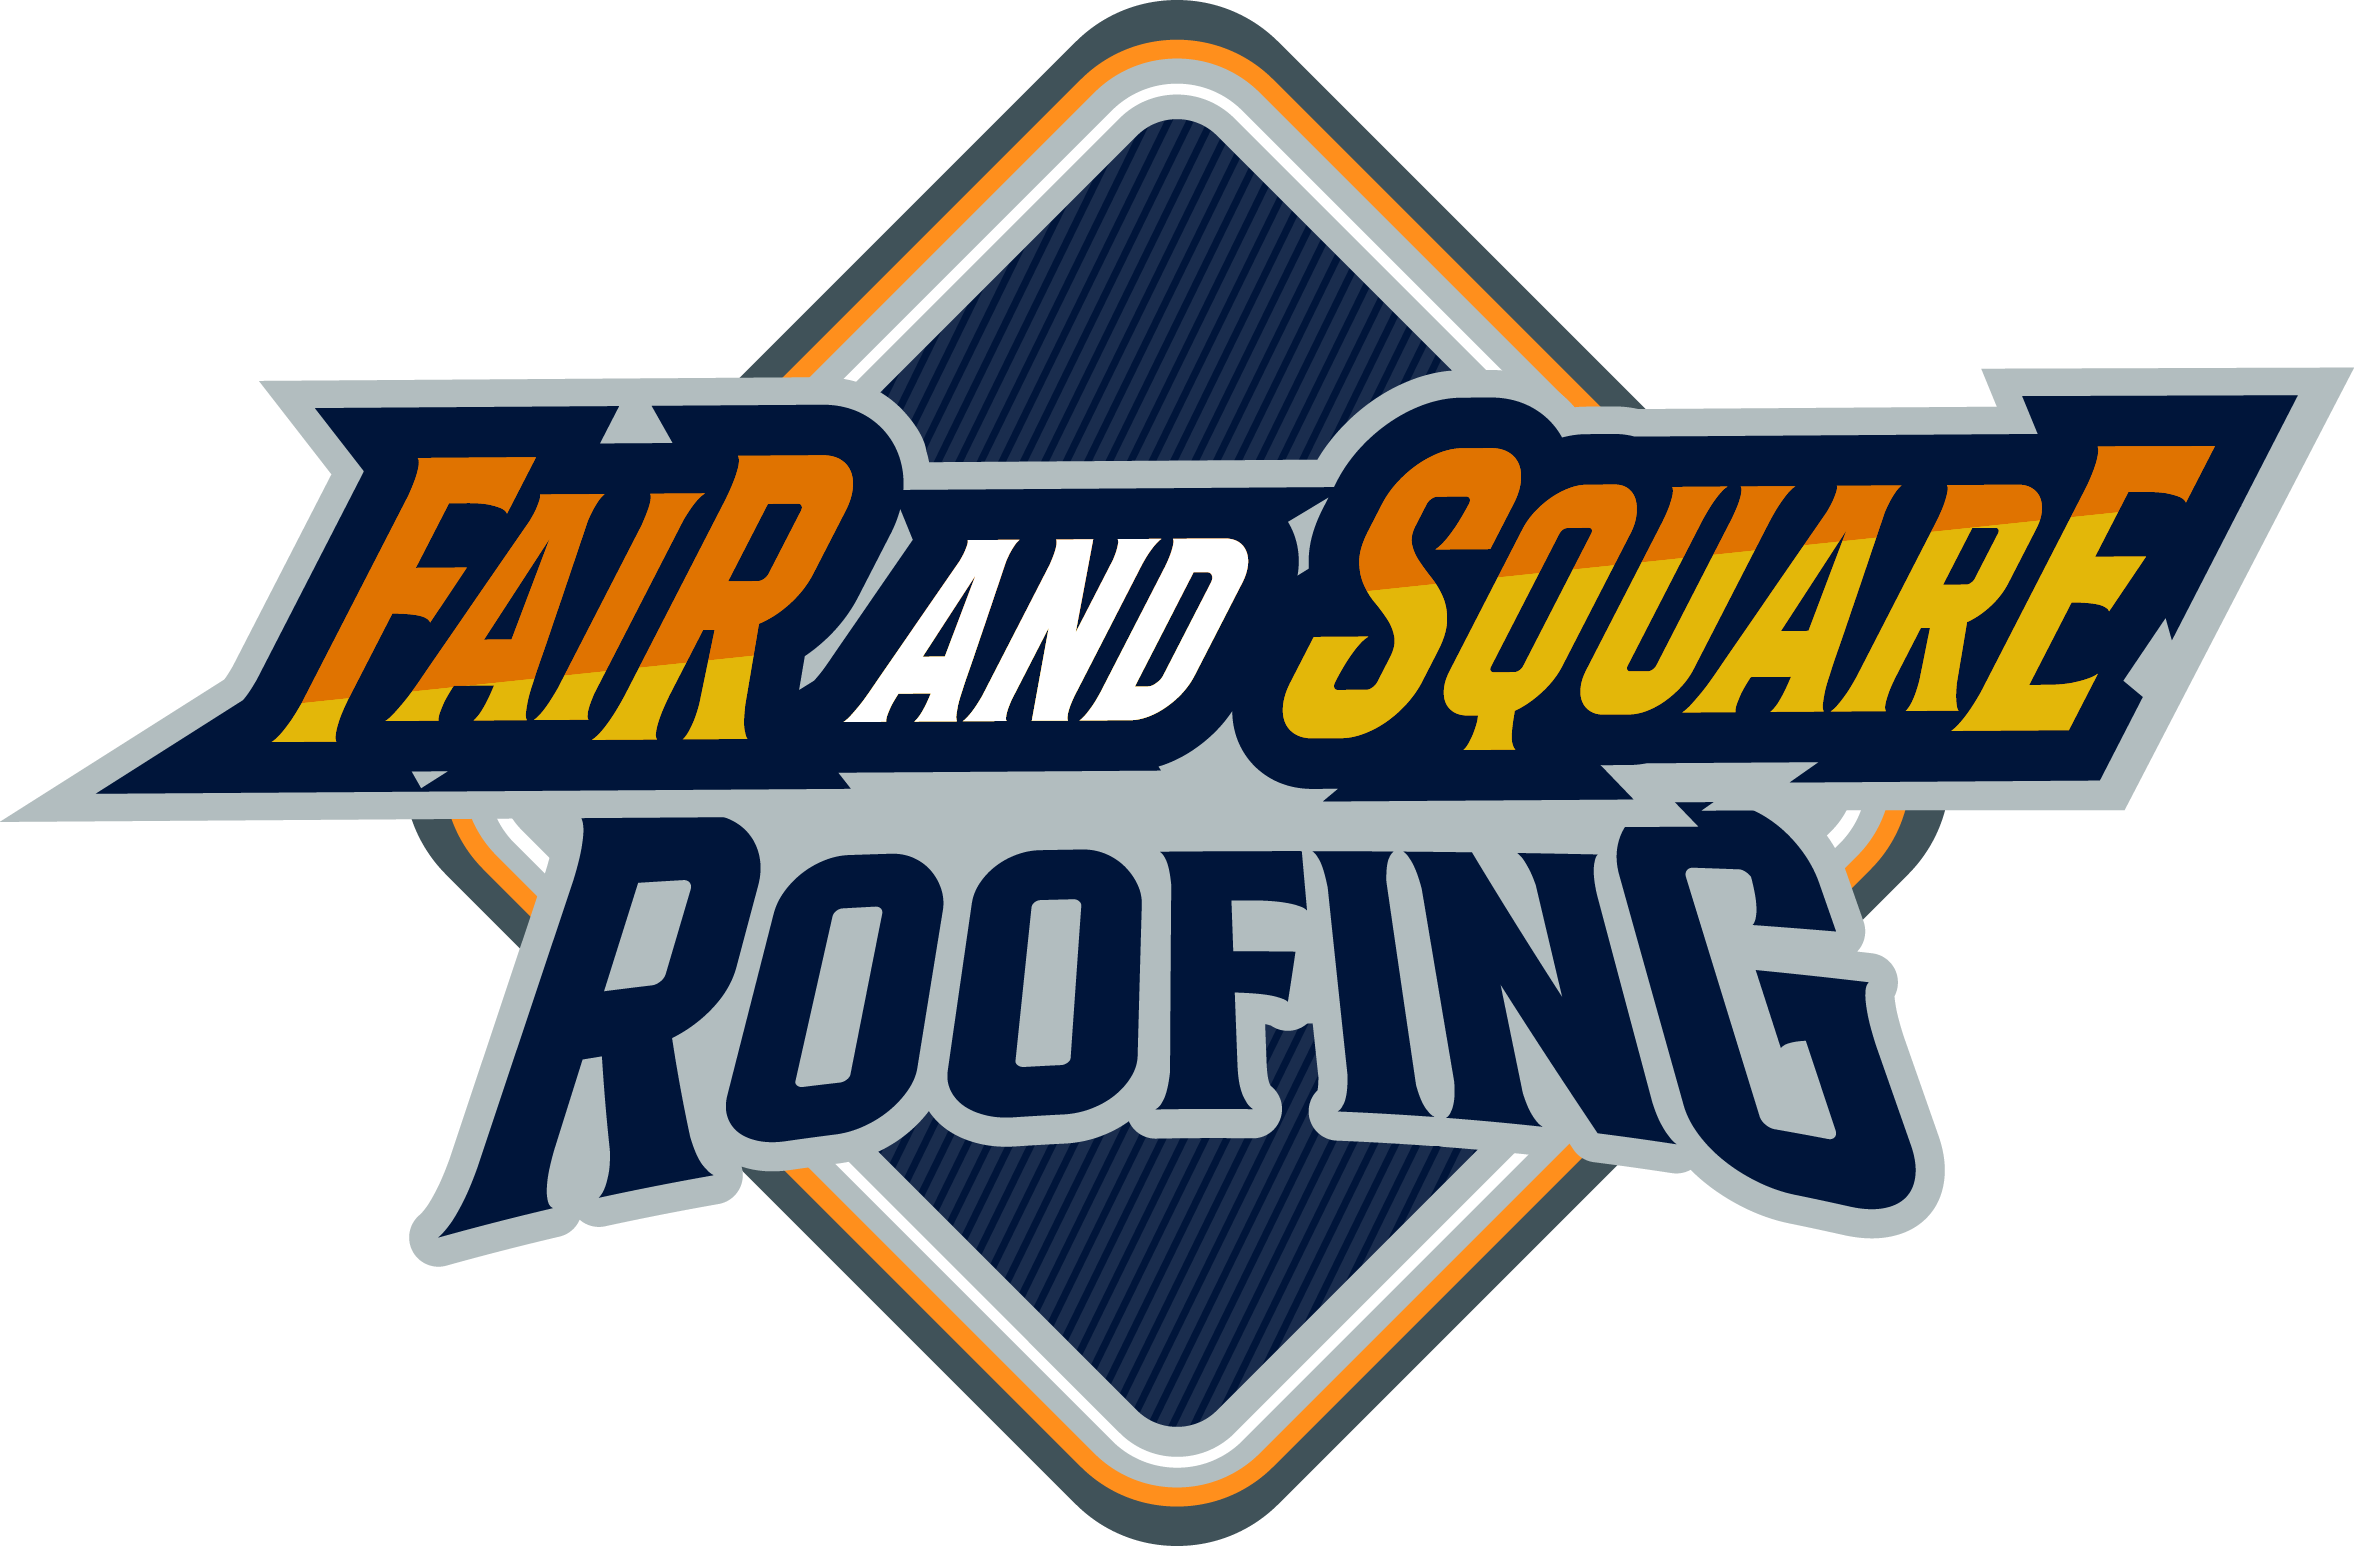 Fair And Square Roofing Inc's logo